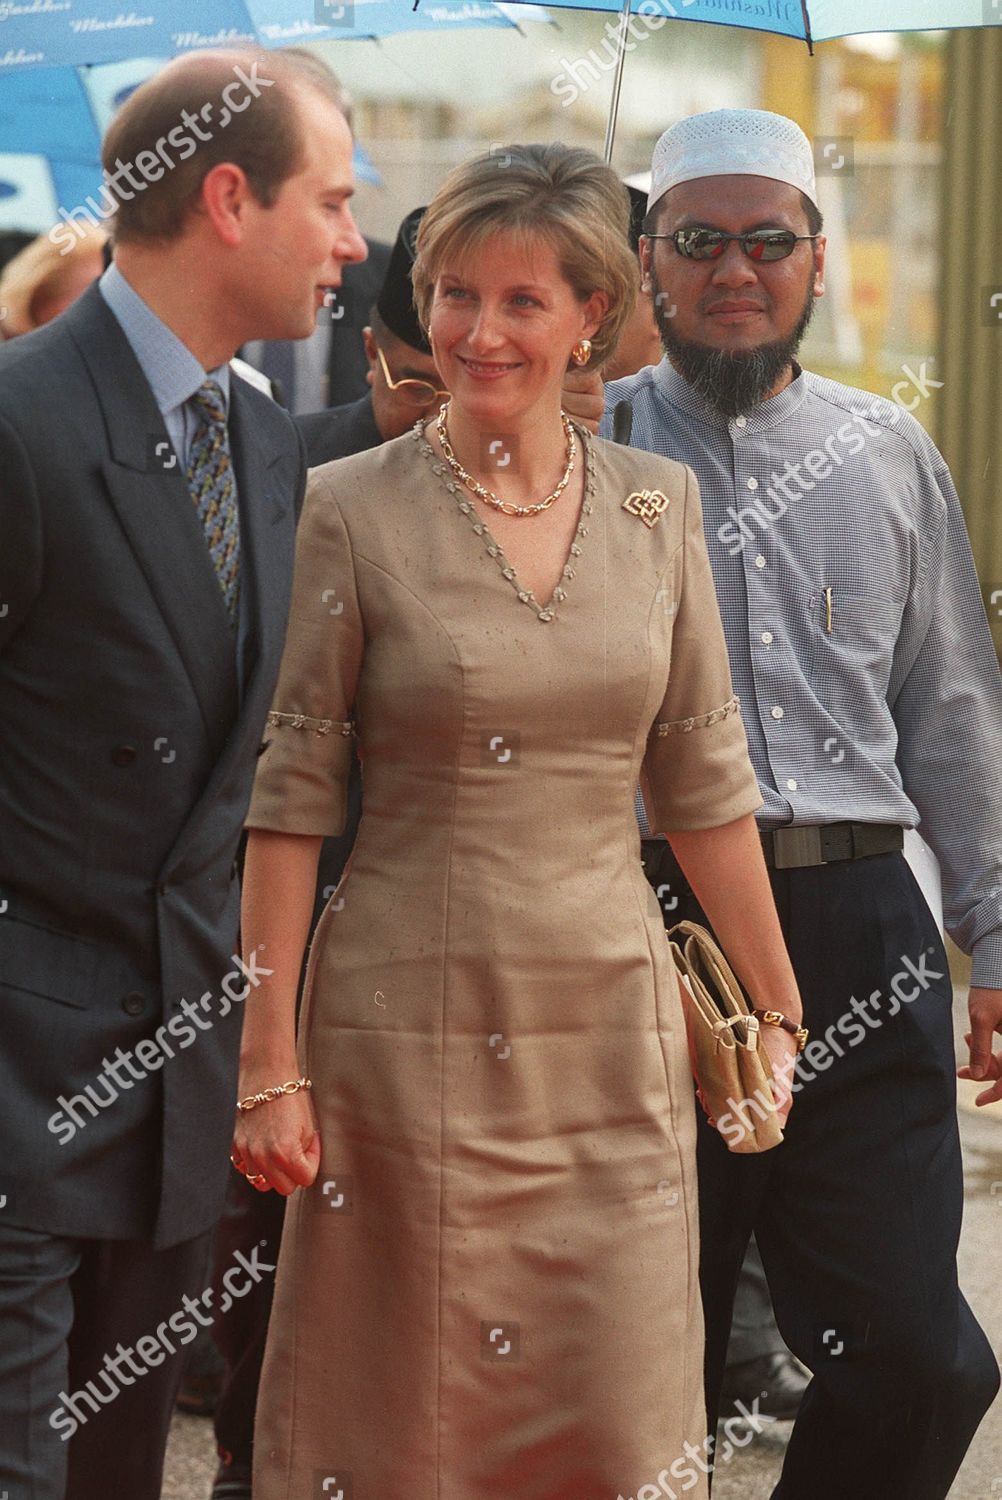 sophie-countess-of-wessex-during-visit-to-brunei-with-her-majesty-the-rajah-isteri-blue-and-her-royal-highness-the-pengiran-isteri-pink-2000-shutterstock-editorial-327961k.jpg